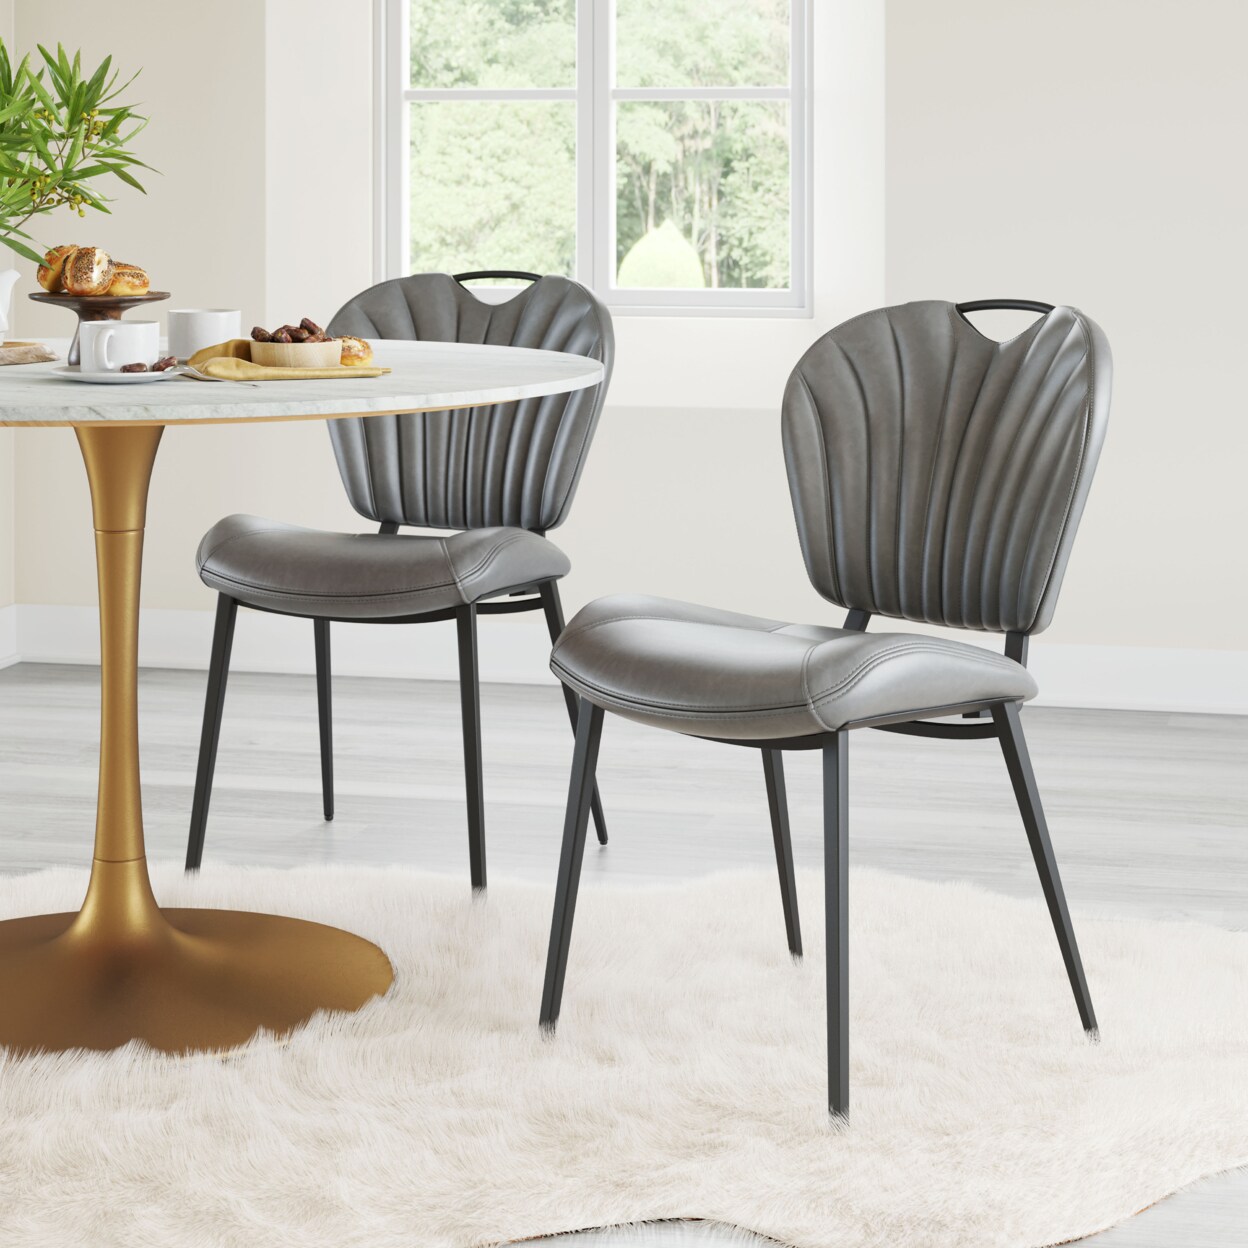 Zuo Modern Terrence Dining Chair (Set of 2)